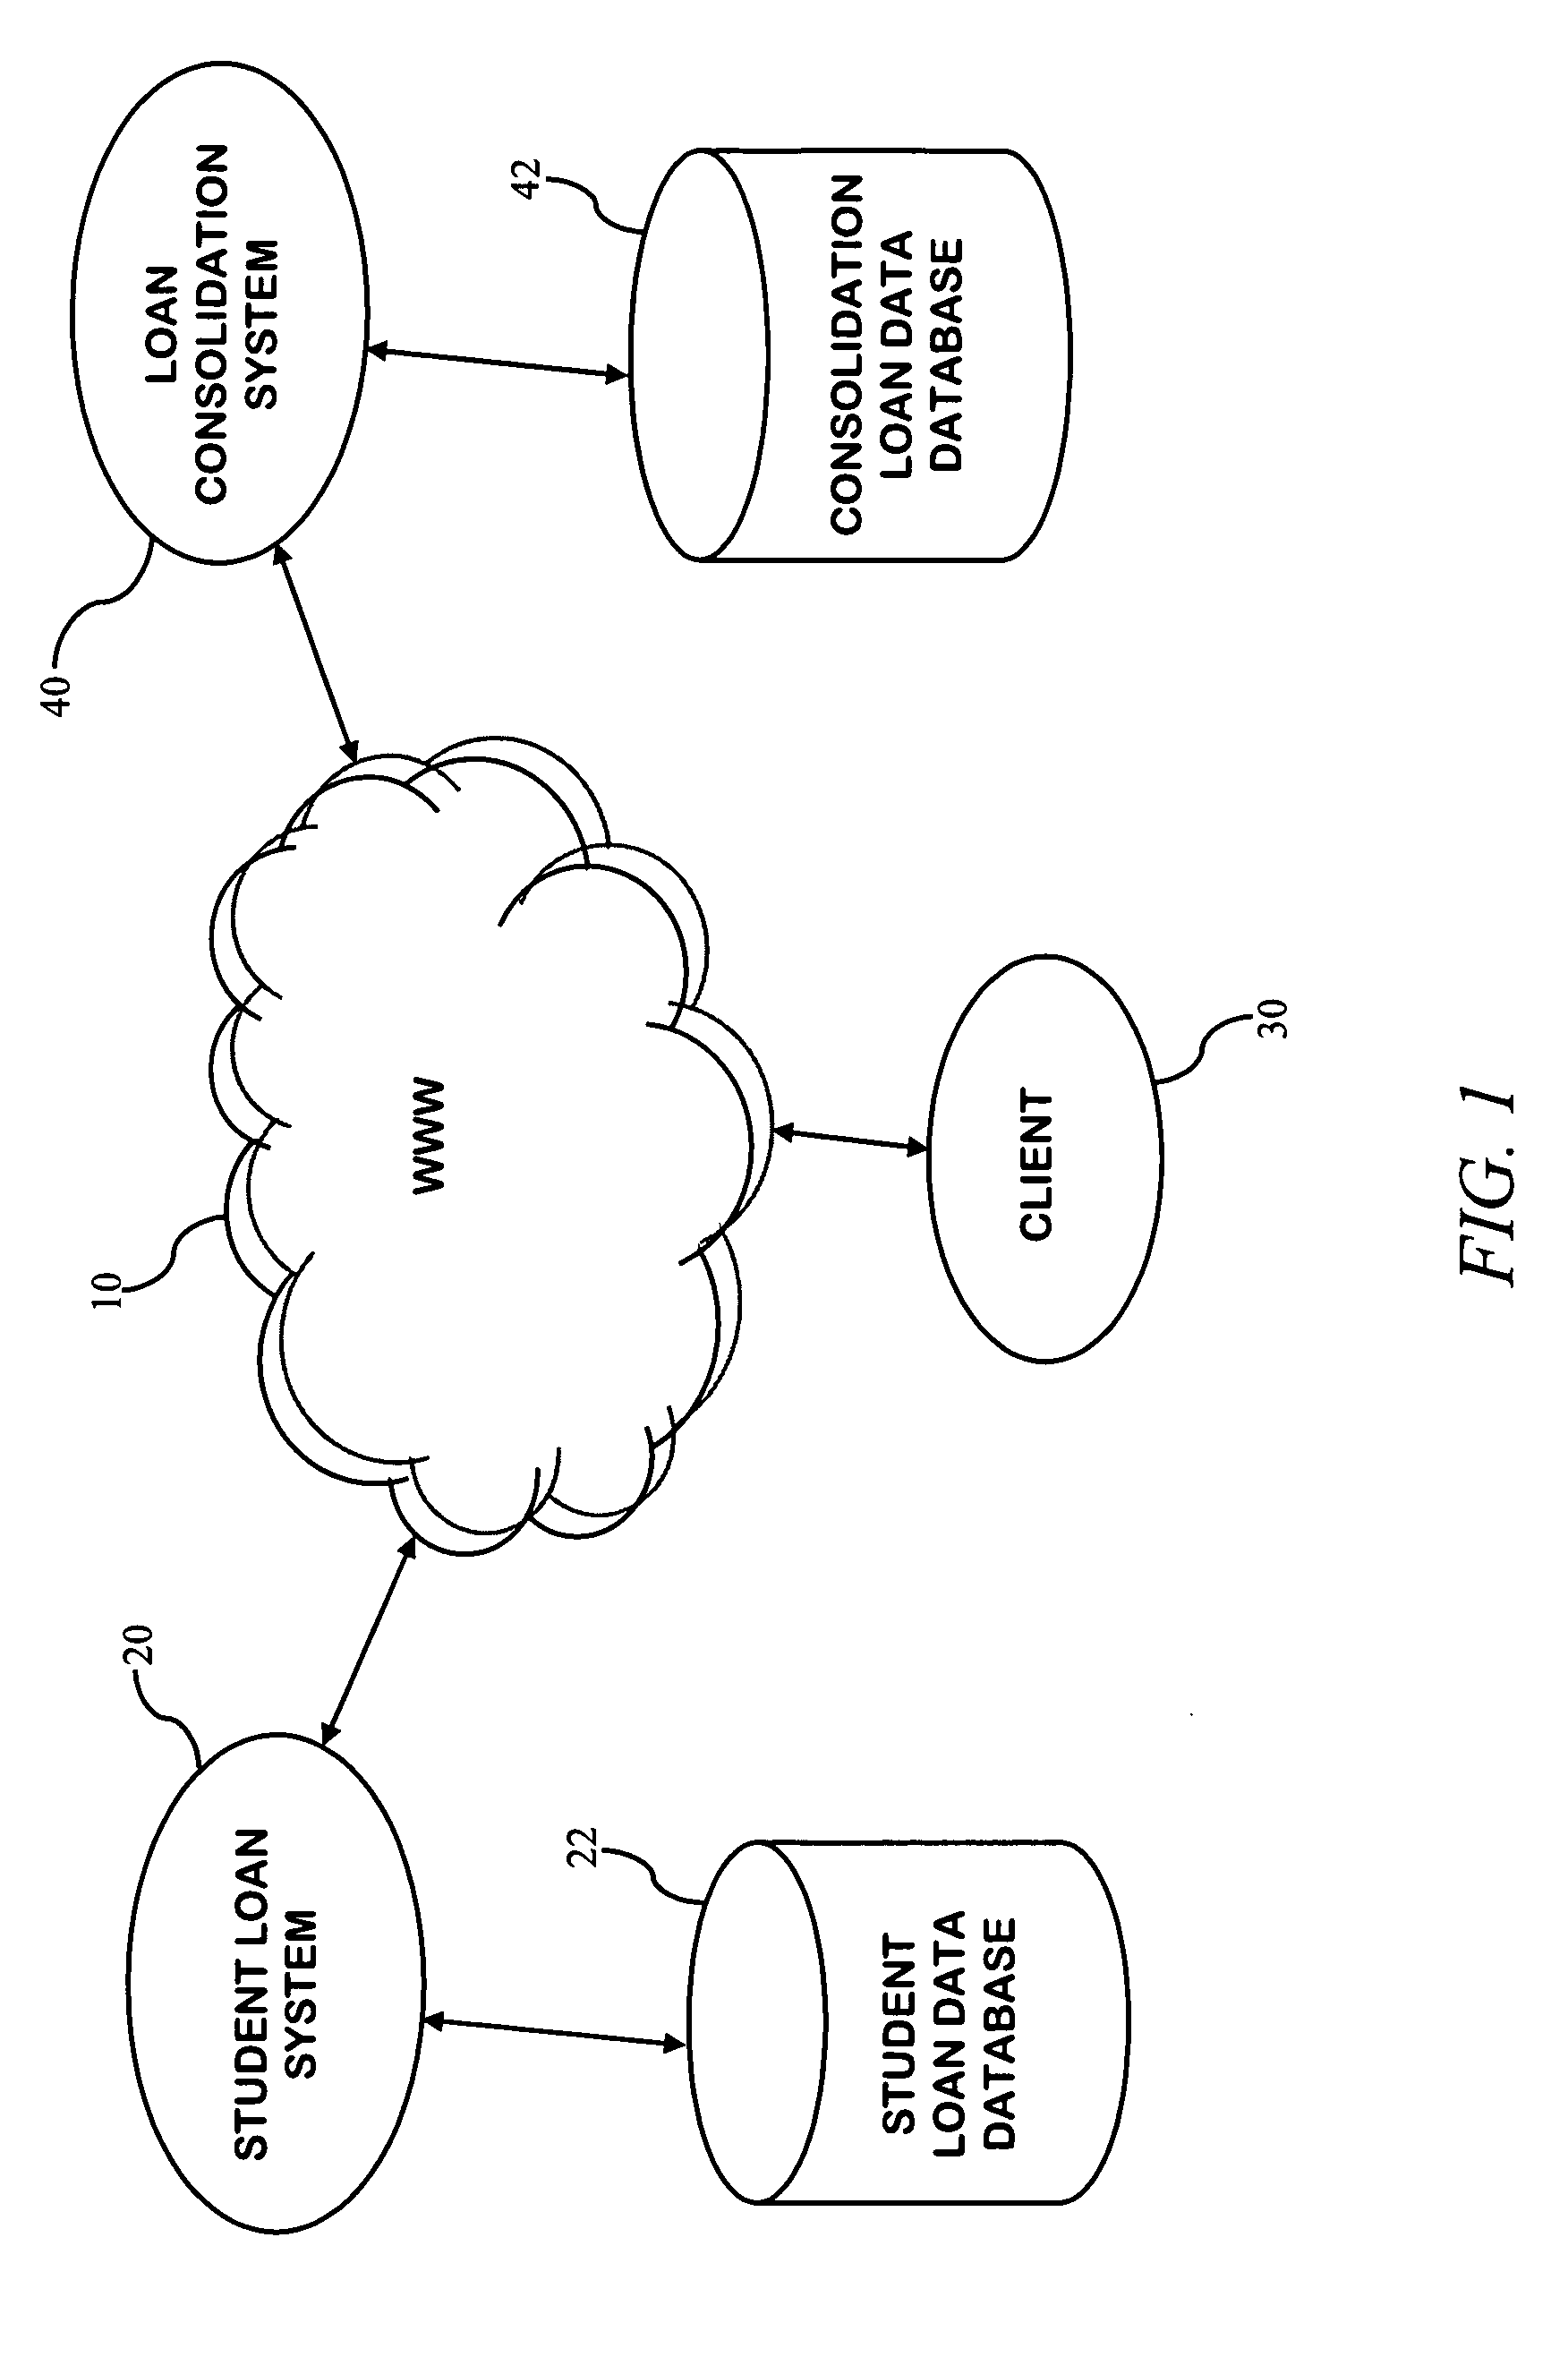 System, method and apparatus for multiple field pasting